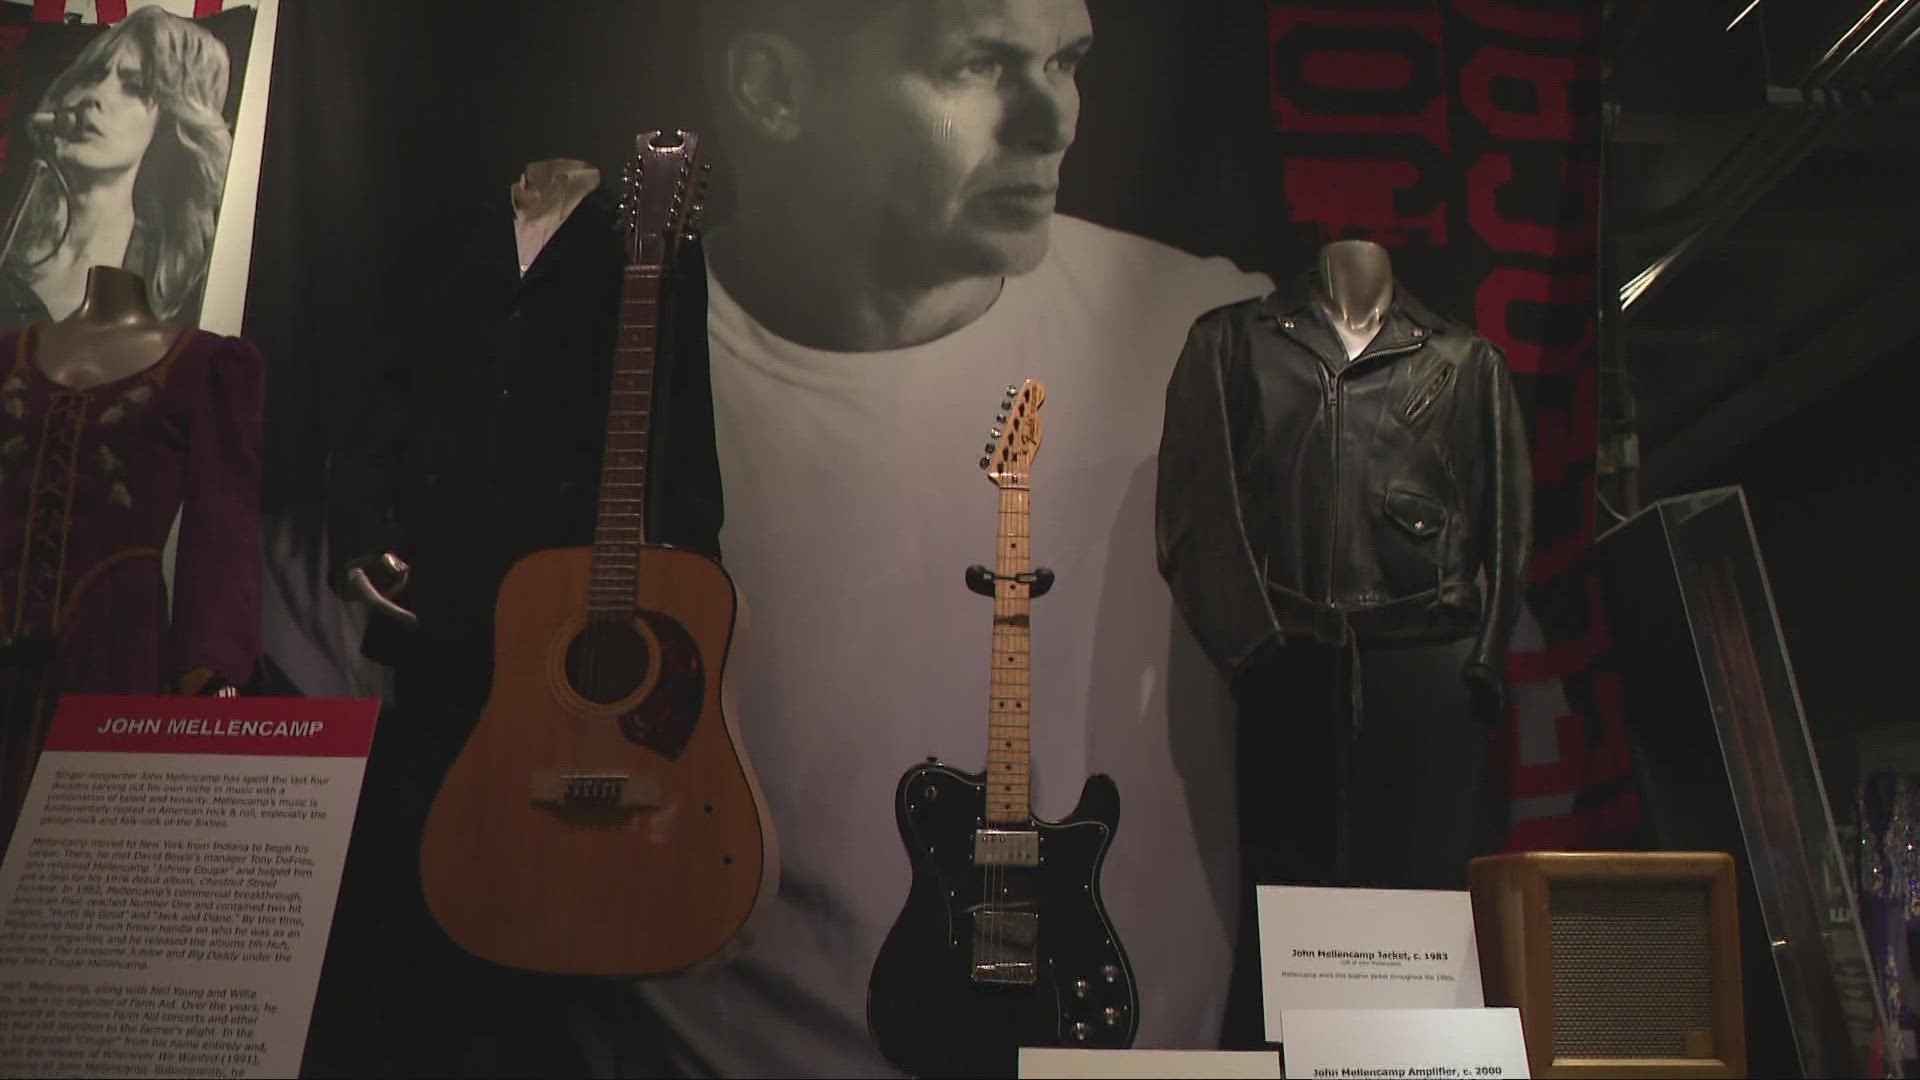 Mellencamp was inducted into the Rock and Roll Hall of Fame back in 2008.